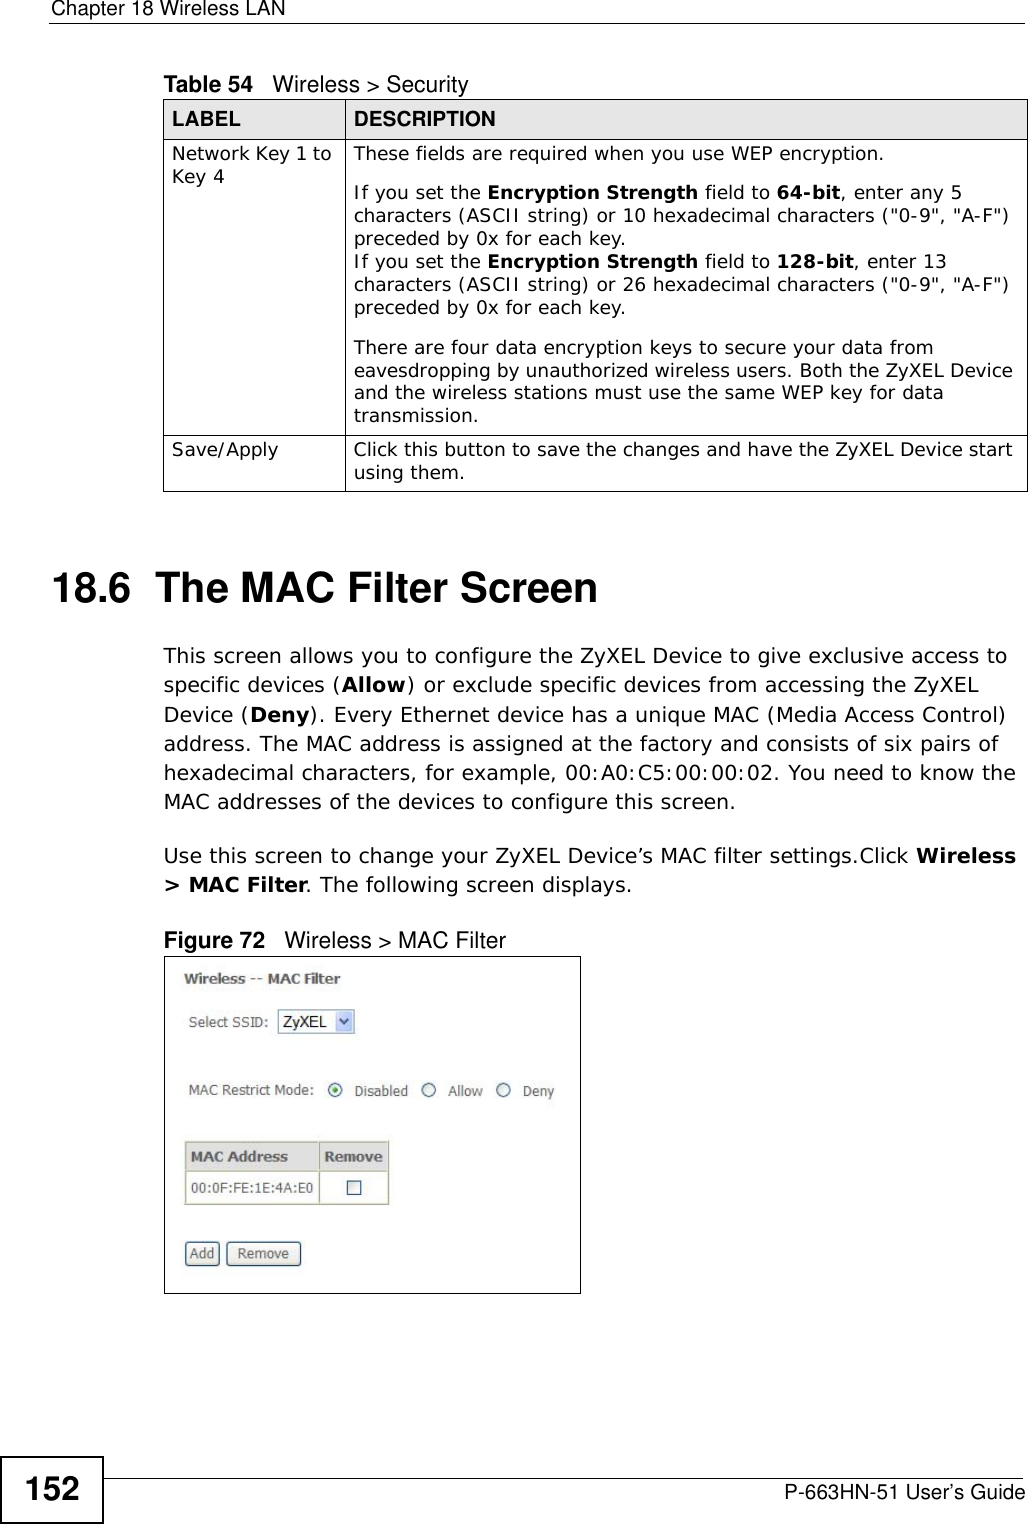 Chapter 18 Wireless LANP-663HN-51 User’s Guide15218.6  The MAC Filter Screen     This screen allows you to configure the ZyXEL Device to give exclusive access to specific devices (Allow) or exclude specific devices from accessing the ZyXEL Device (Deny). Every Ethernet device has a unique MAC (Media Access Control) address. The MAC address is assigned at the factory and consists of six pairs of hexadecimal characters, for example, 00:A0:C5:00:00:02. You need to know the MAC addresses of the devices to configure this screen.Use this screen to change your ZyXEL Device’s MAC filter settings.Click Wireless &gt; MAC Filter. The following screen displays.Figure 72   Wireless &gt; MAC FilterNetwork Key 1 to Key 4 These fields are required when you use WEP encryption.If you set the Encryption Strength field to 64-bit, enter any 5 characters (ASCII string) or 10 hexadecimal characters (&quot;0-9&quot;, &quot;A-F&quot;) preceded by 0x for each key.If you set the Encryption Strength field to 128-bit, enter 13 characters (ASCII string) or 26 hexadecimal characters (&quot;0-9&quot;, &quot;A-F&quot;) preceded by 0x for each key.There are four data encryption keys to secure your data from eavesdropping by unauthorized wireless users. Both the ZyXEL Device and the wireless stations must use the same WEP key for data transmission.Save/Apply Click this button to save the changes and have the ZyXEL Device start using them.Table 54   Wireless &gt; SecurityLABEL DESCRIPTION